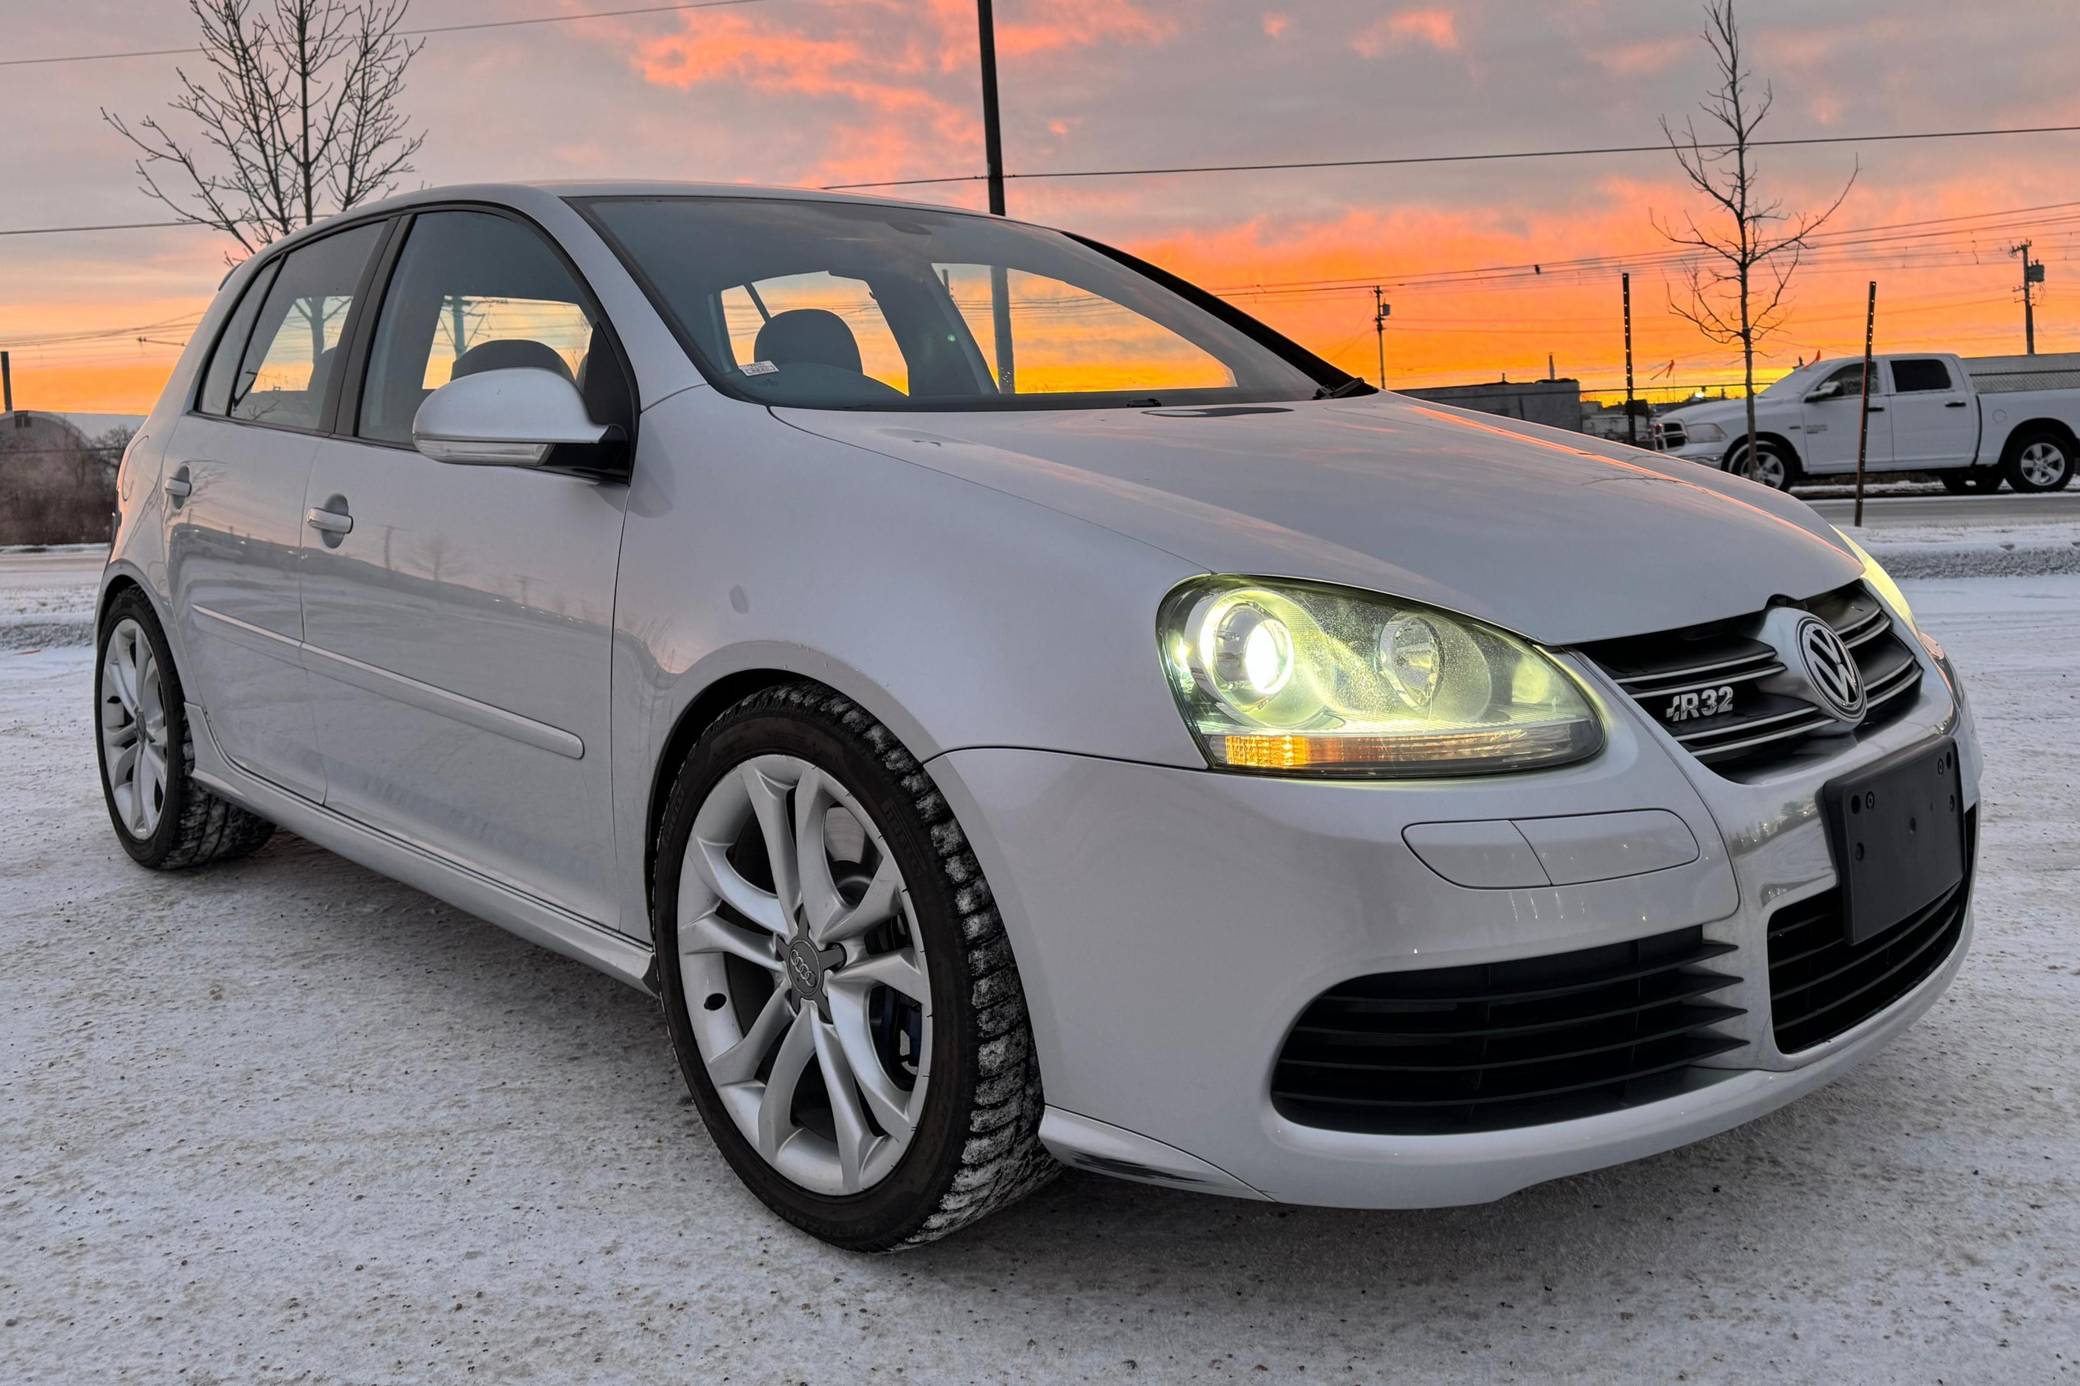 The upcoming classic caR: the Golf Mk5 R32.